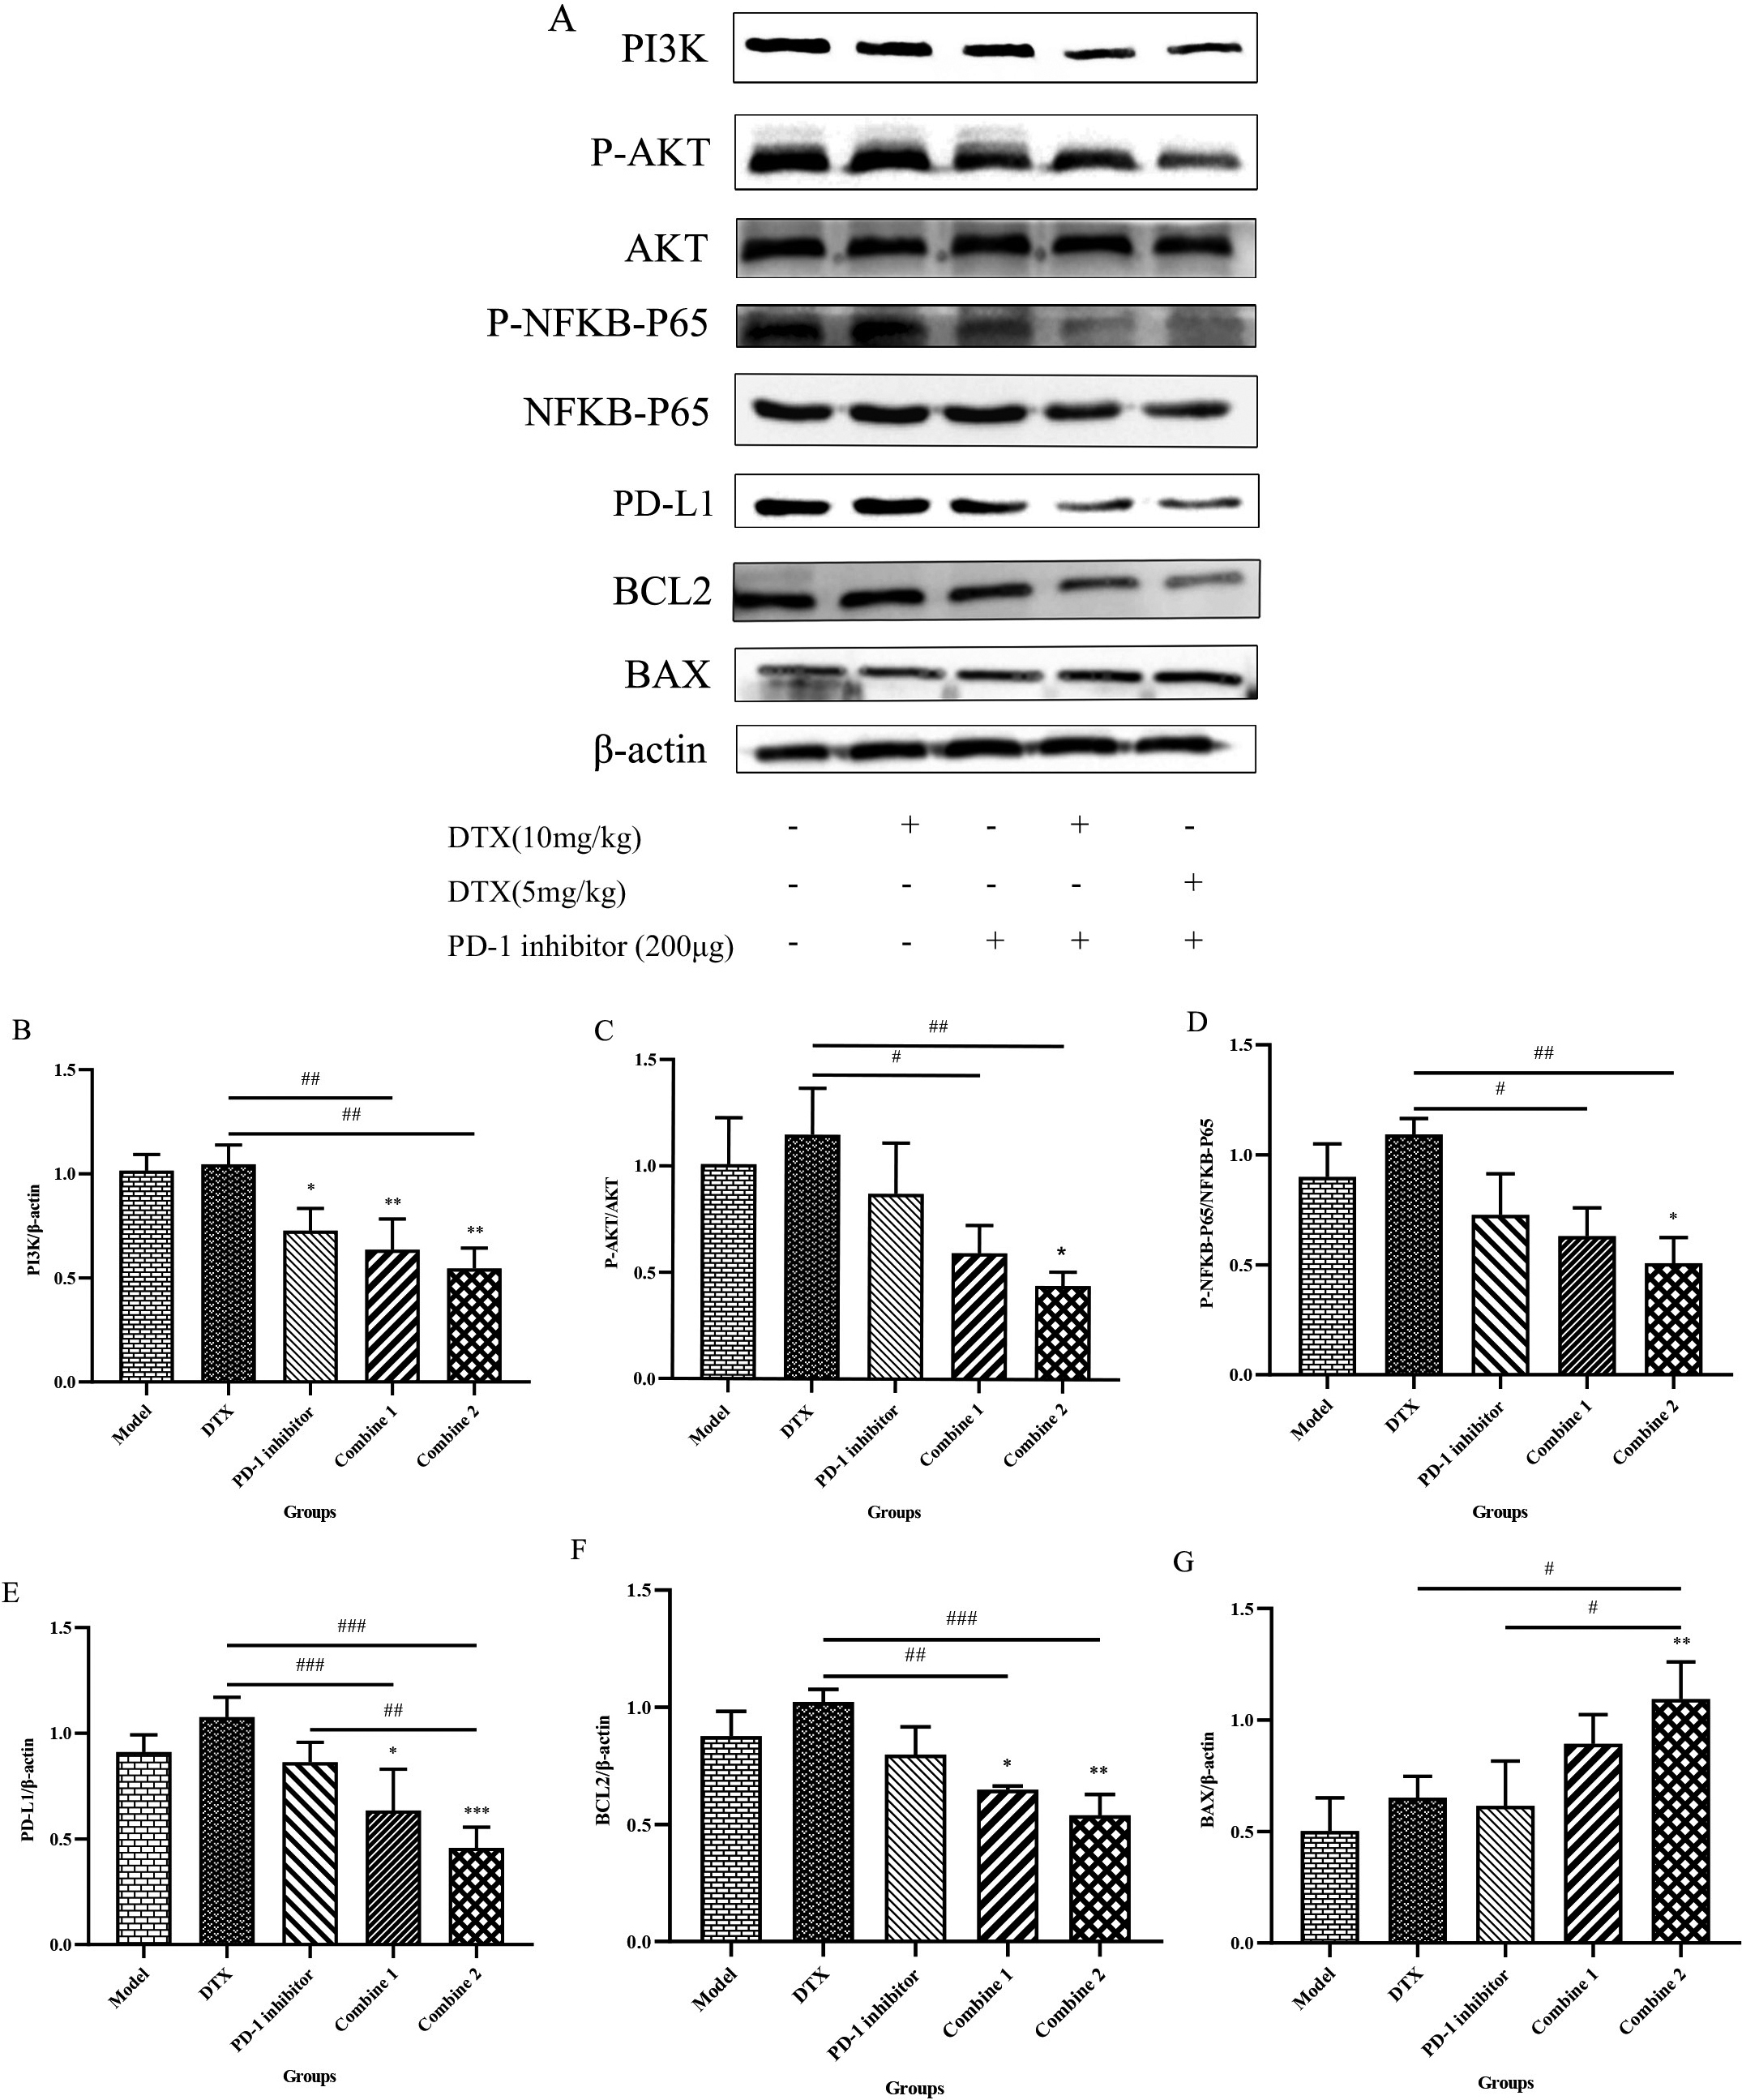 PD-1 inhibitor combined with Docetaxel exerted synergistic effects by inhibiting the NFKB-P65/PD-L1 signaling pathway. (A) Tumors were harvested after mice being sacrificed. The prepared protein samples were subjected to western blot in 10% separation gel and 5% concentrated gel, incubated overnight with Anti-PI3K, Anti-AKT, Anti-BCL2, Anti-BAX, Anti-NF-kB p65, Anti-P-NF-kB p65 Rabbit pAb and Anti-PD-L1 Rabbit pAb, and prtein bands were visualized with the AlphaImager HP gel imaging system. (B) The gels of PI3K and β-actin were analyzed with the Image J software (n= 3). *P< 0.05; **P< 0.01(versus Model group, One-way ANOVA test followed by Tukey’s multiple cormparisons test). ##P< 0.01 (versus DTX group, One-way ANOVA test followed by Tukey’s multiple comparisons test). (C) The gels of P-AKT and AKT were analyzed with the Image J software (n= 3). *P< 0.05; (versus Model group, One-way ANOVA test followed by Tukey’s multiple cormparisons test). #P< 0.05, ##P< 0.01, (versus DTX group, One-way ANOVA test followed by Tukey’s multiple comparisons test). (D) The gels of P-NFKB-P65 and NFKB-P65 were analyzed with the Image J software (n= 3). *P< 0.05 (versus Model group, One-way ANOVA test followed by Tukey’s multiple cormparisons test). #P< 0.05, ##P< 0.01 (versus DTX group, One-way ANOVA test followed by Tukey’s multiple comparisons test). (E) The gels of PD-L1 and β-actin were analyzed with the Image J software (n= 3). *P< 0.05; ***P< 0.001(versus Model group, One-way ANOVA test followed by Tukey’s multiple cormparisons test). ##P< 0.01 (PD-1 inhibitor group versus Combine 2 group, One-way ANOVA test followed by Tukey’s multiple comparisons test); ###P< 0.001 (versus DTX group, One-way ANOVA test followed by Tukey’s multiple comparisons test). (F) The gels of BCL2 and β-actin were analyzed with the Image J software (n= 3). *P< 0.05; **P< 0.01 (versus Model group, One-way ANOVA test followed by Tukey’s multiple cormparisons test). ##P< 0.01, ###P< 0.001 (versus DTX group, One-way ANOVA test followed by Tukey’s multiple comparisons test). (G)The gels of BAX and β-actin were analyzed with the Image J software (n= 3). **P< 0.05 (versus Model group, One-way ANOVA test followed by Tukey’s multiple cormparisons test). #P< 0.05 (versus Combine 2 group, One-way ANOVA test followed by Tukey’s multiple comparisons test). 